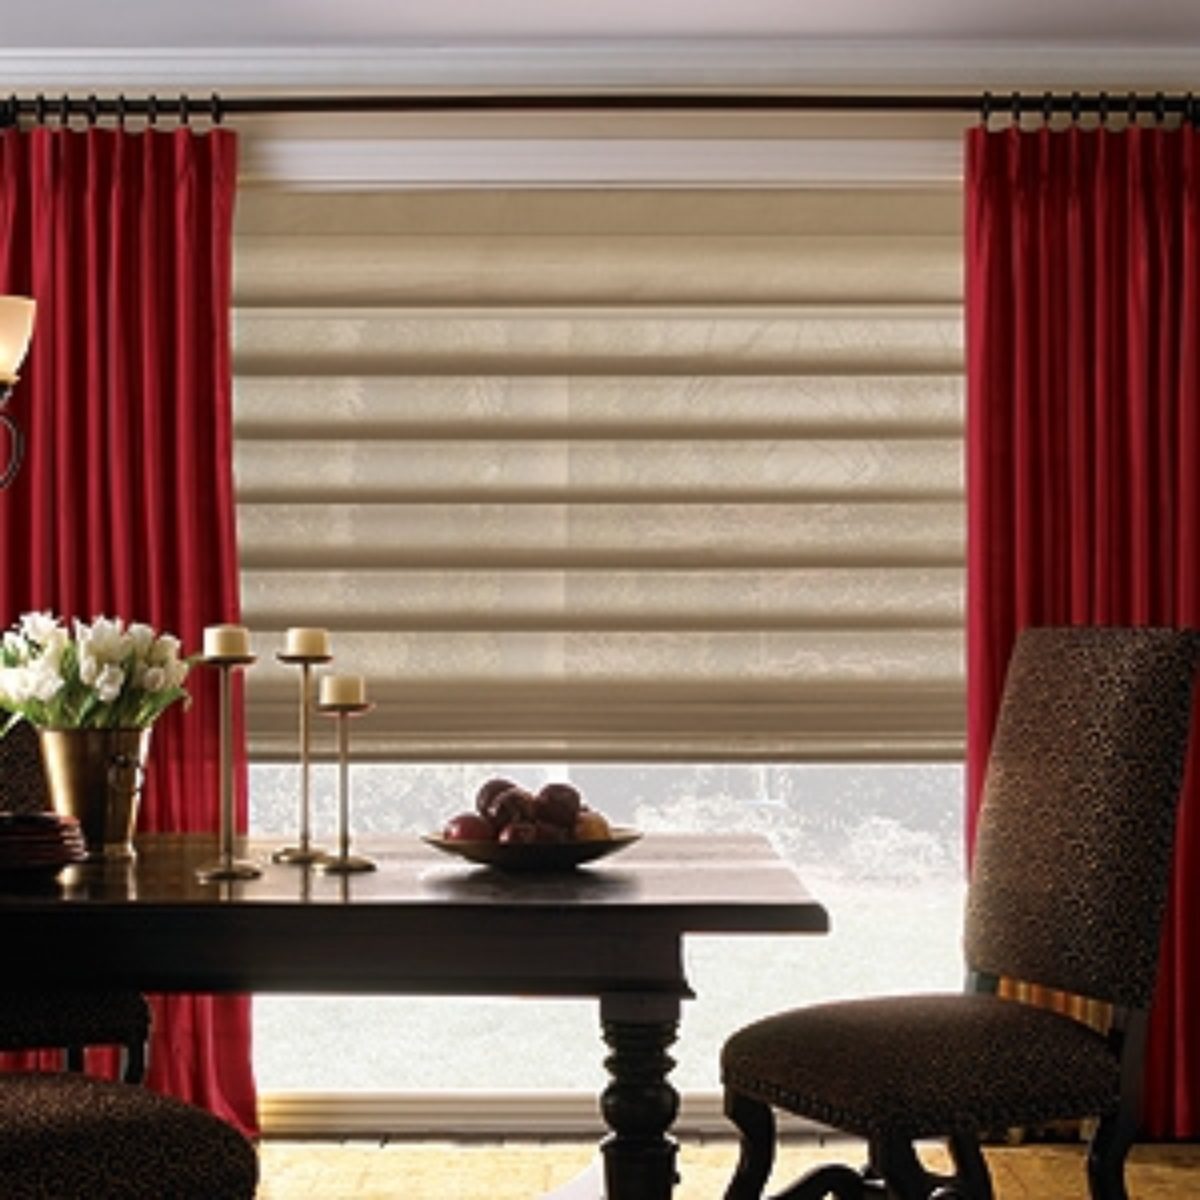 top clamp fix B x L Fabric Polyester braced Lichtblick roman blind without drilling 60 cm x 130 cm yellow 